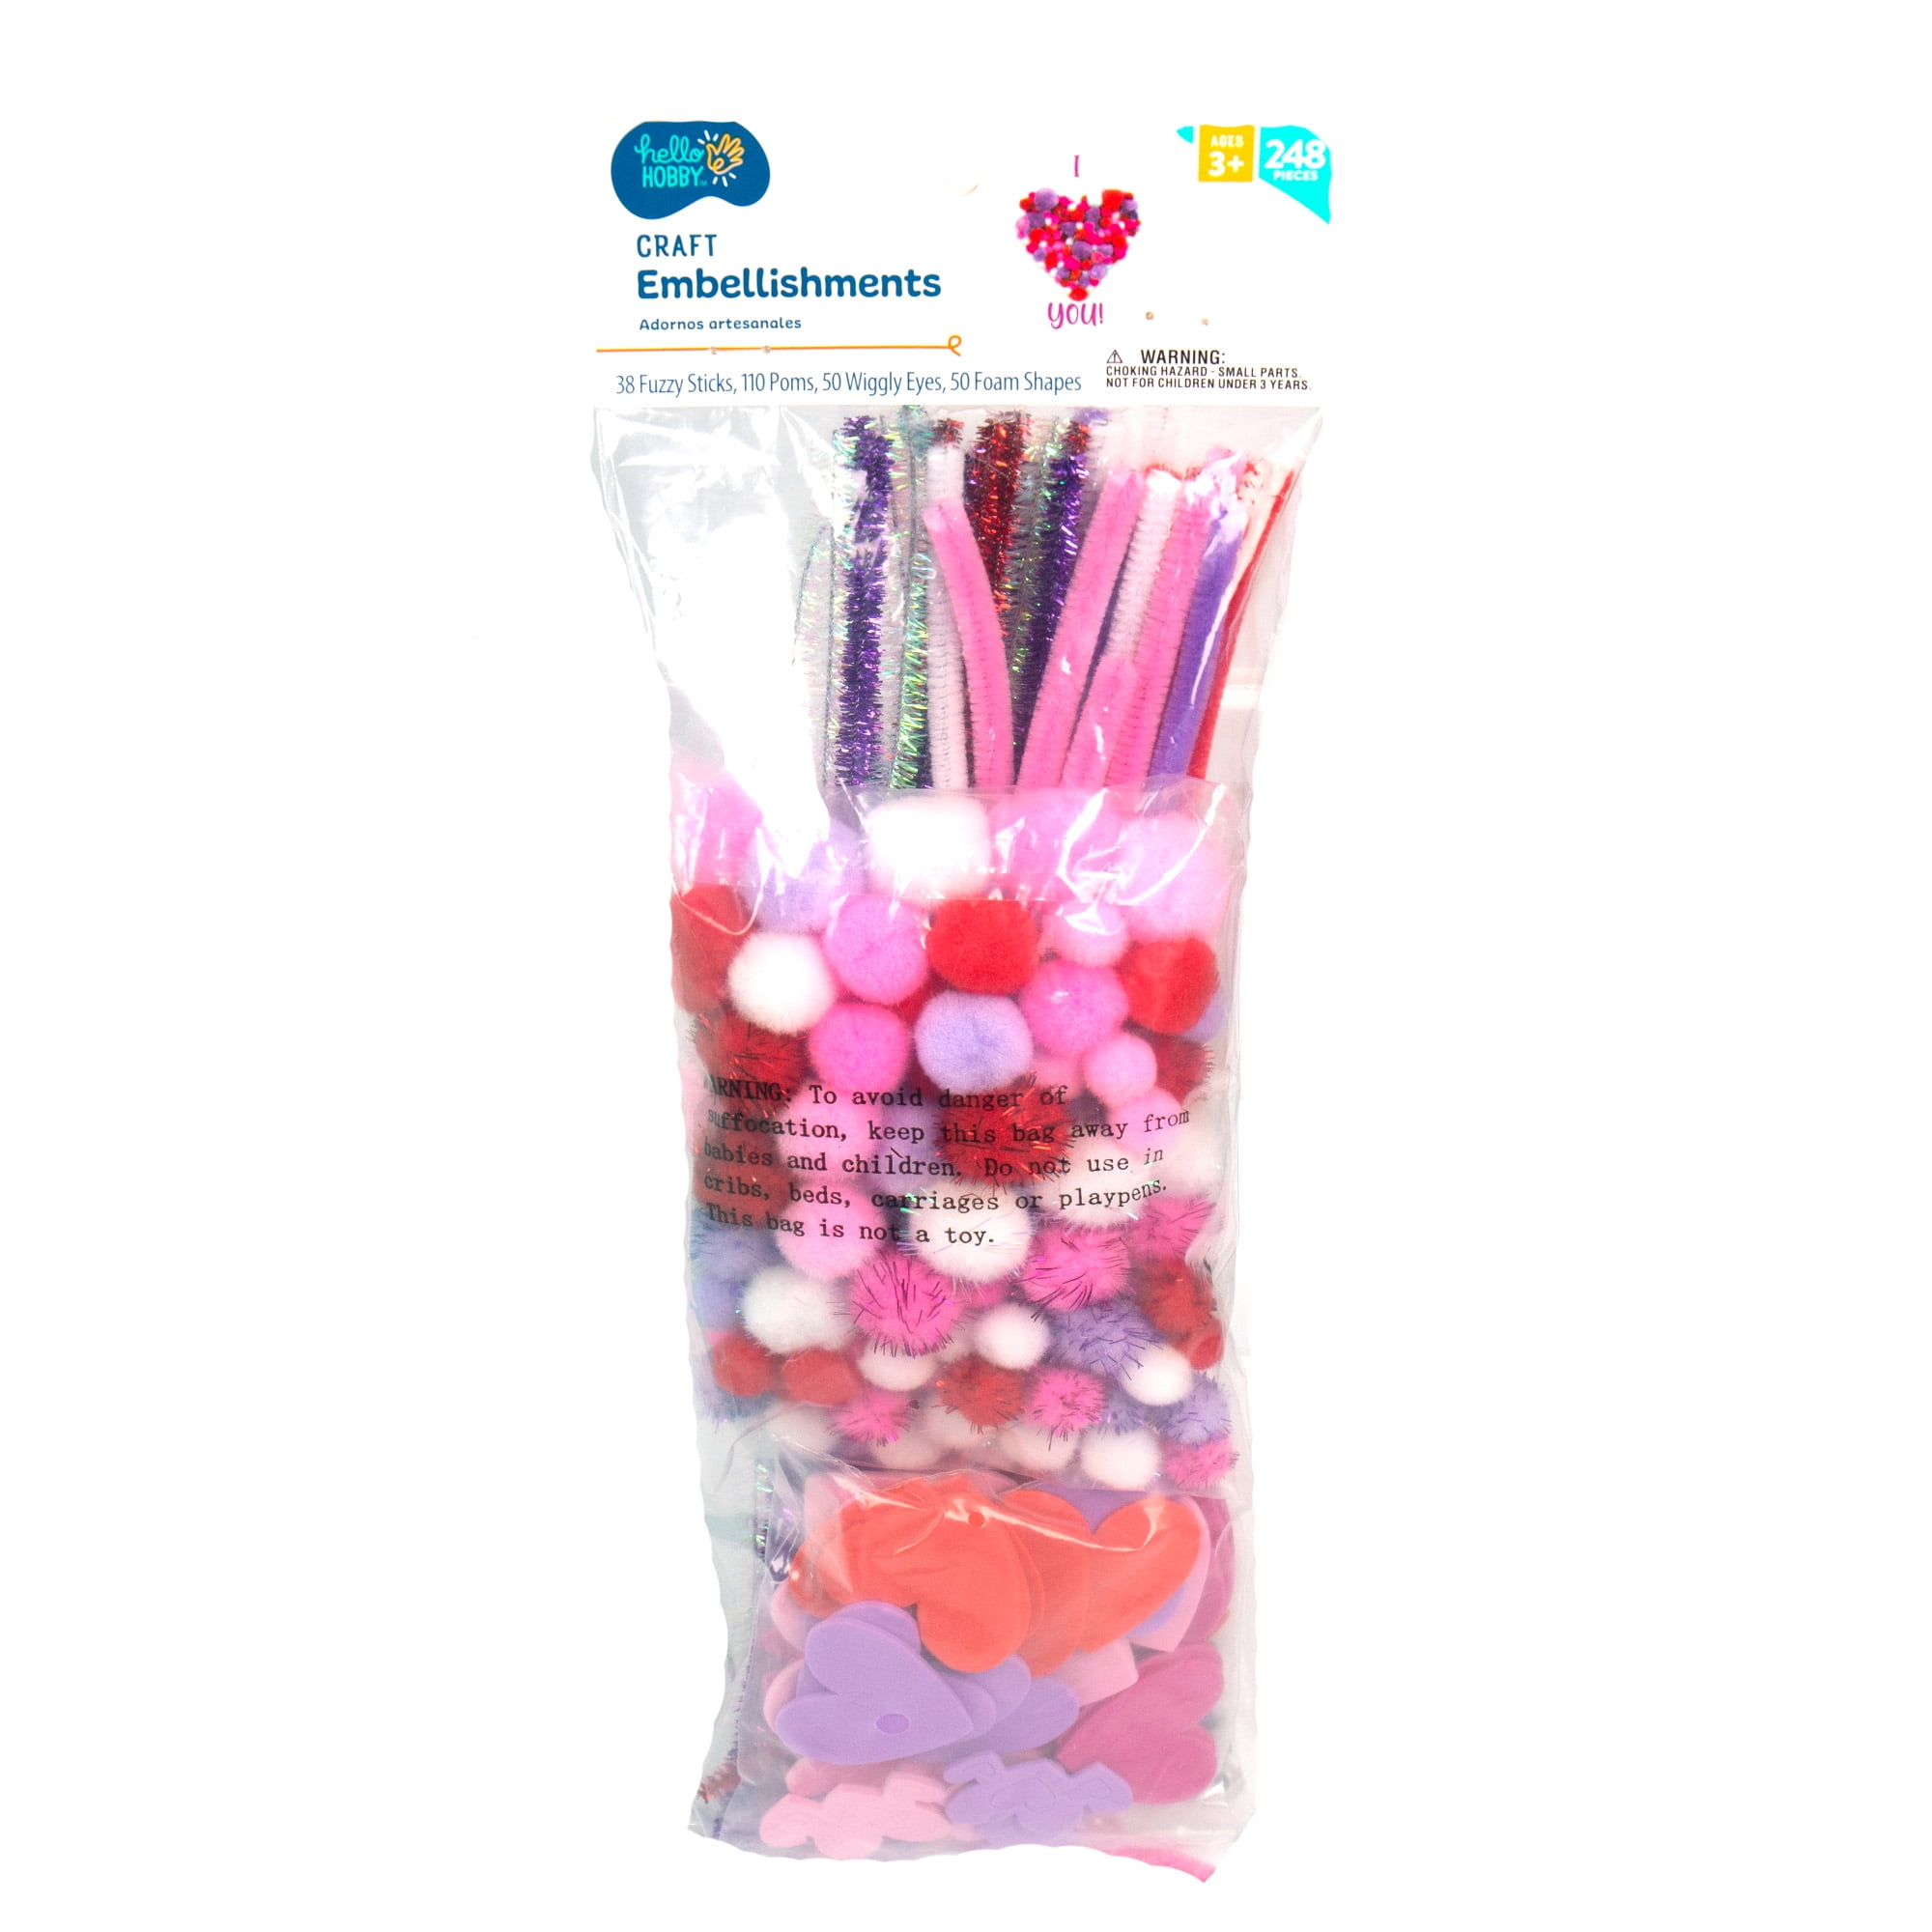 Hello Hobby Valentine’s Day Craft Embellishments, 248-Piece, Boys and Girls, Child, Ages 3+